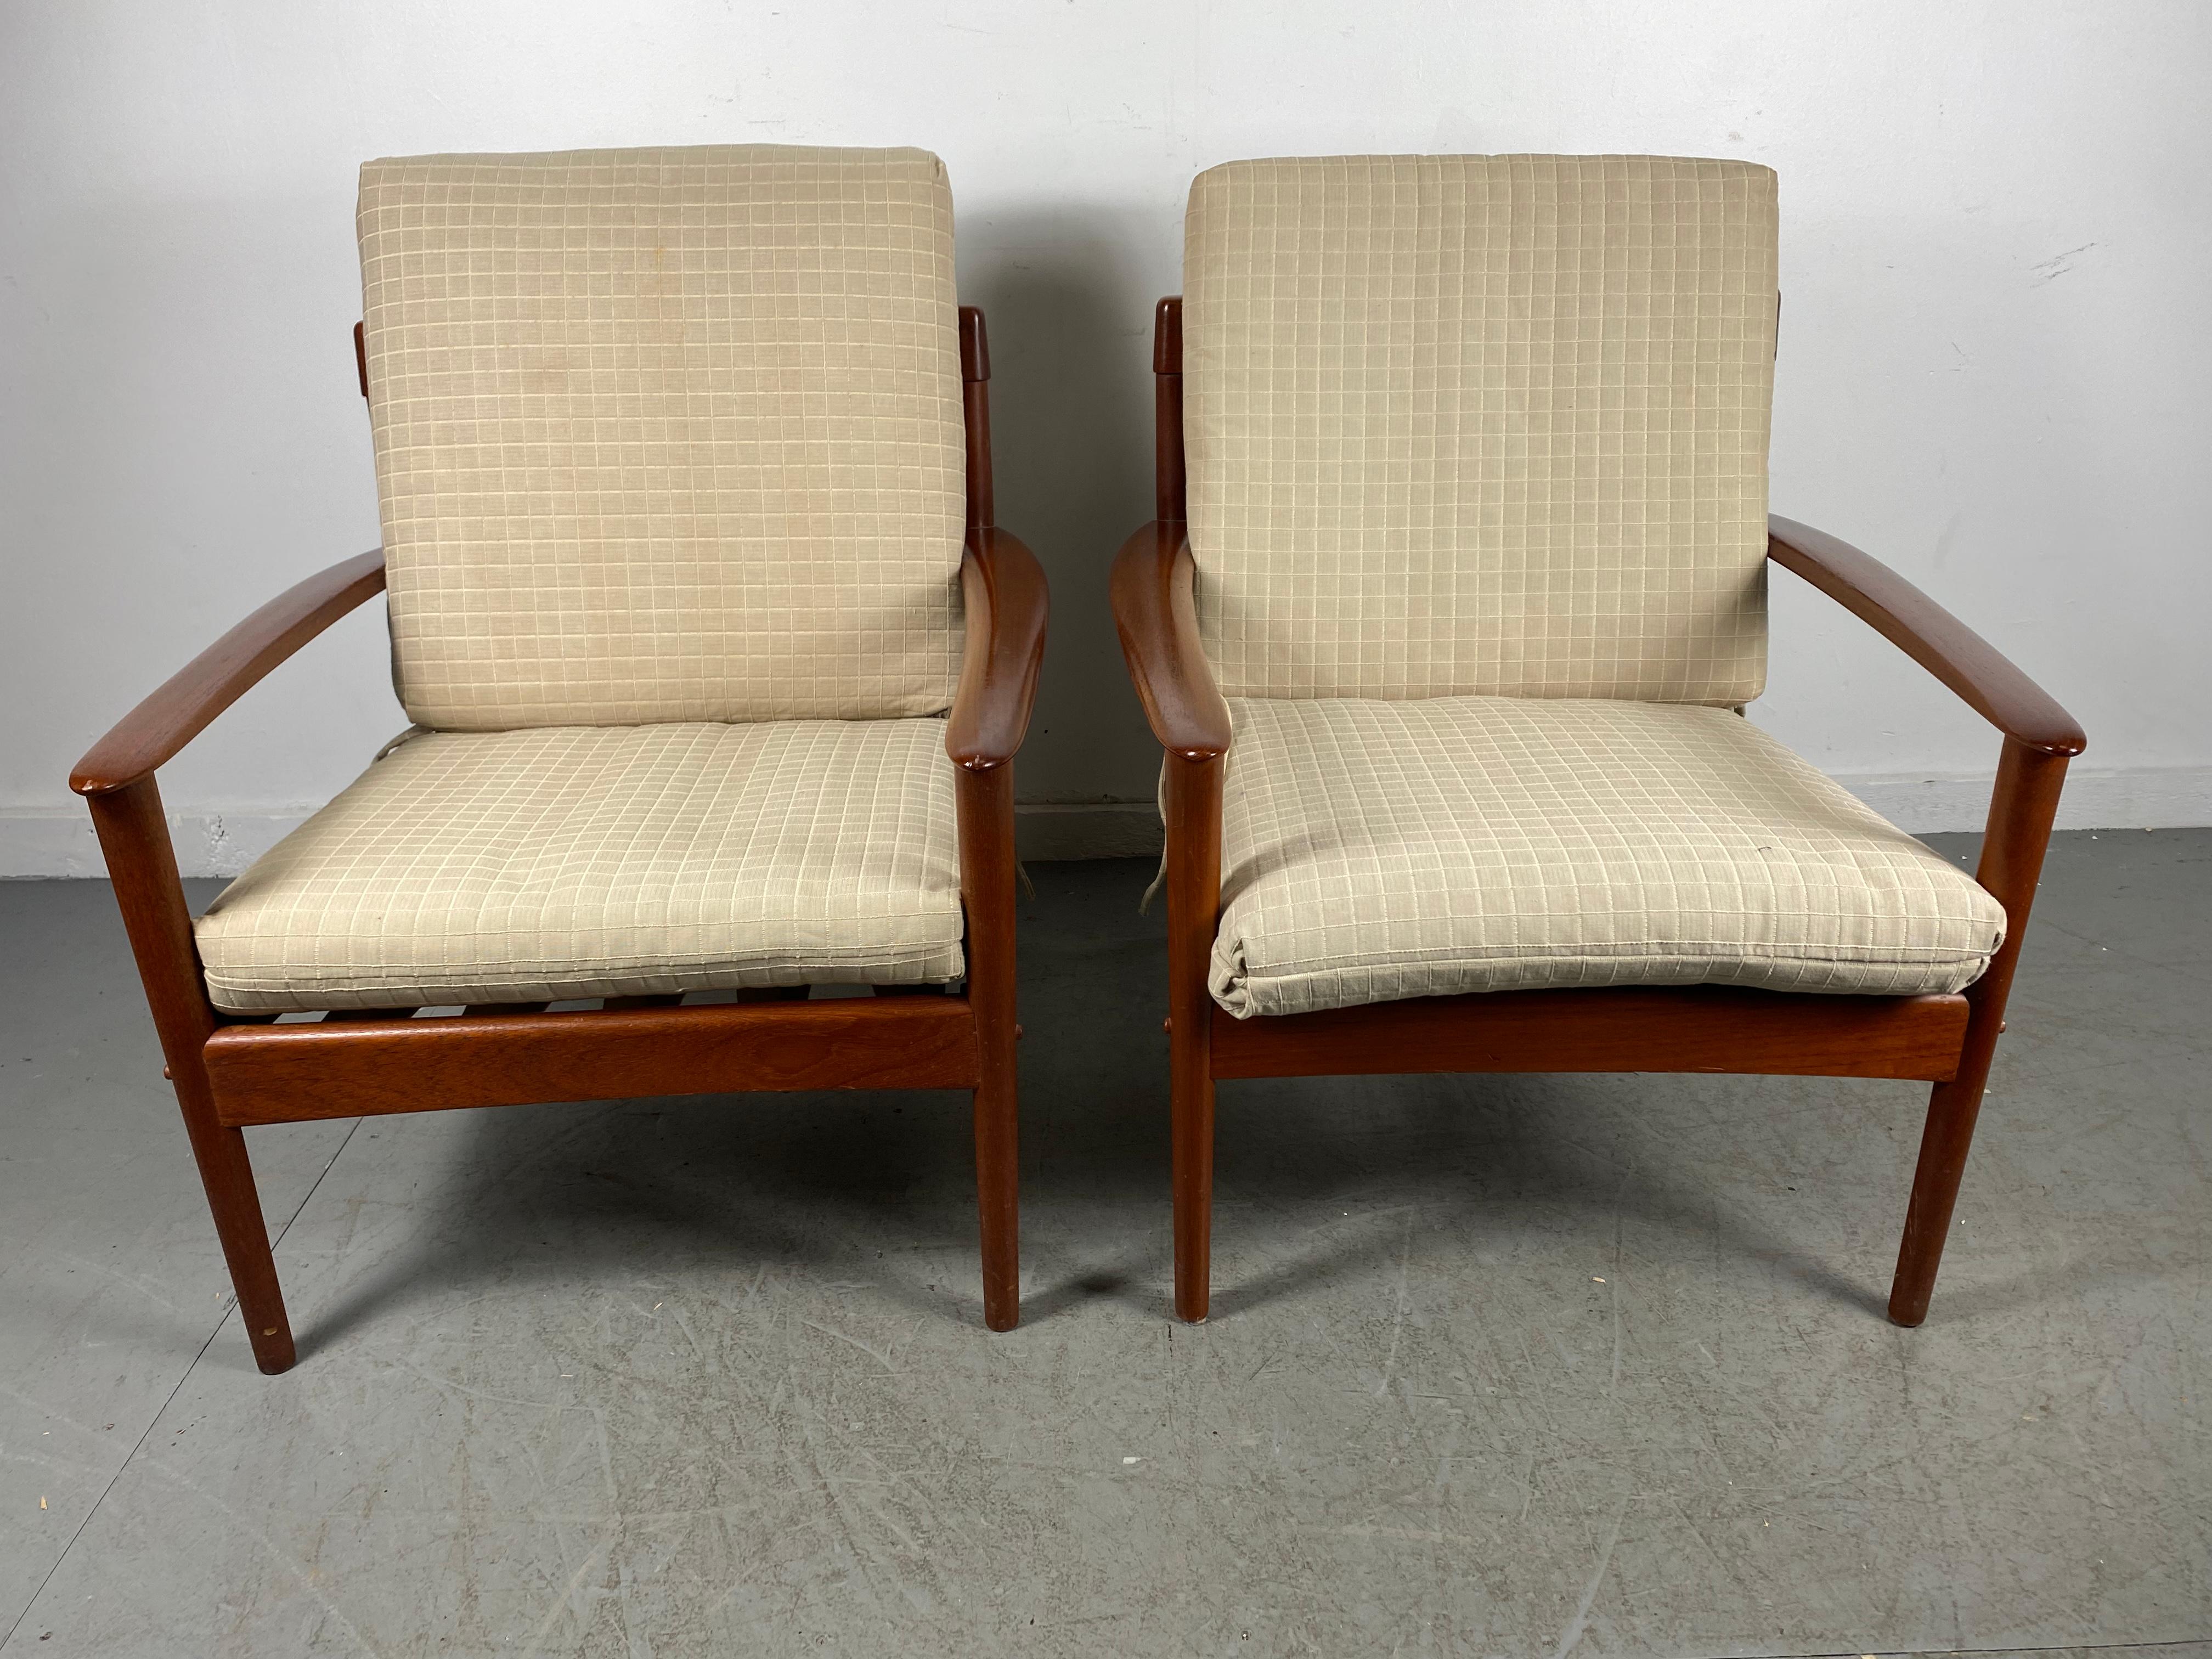 Danish Classic Pair Teak Easy Chairs Designed by Grete Jalk, Made in Denmark